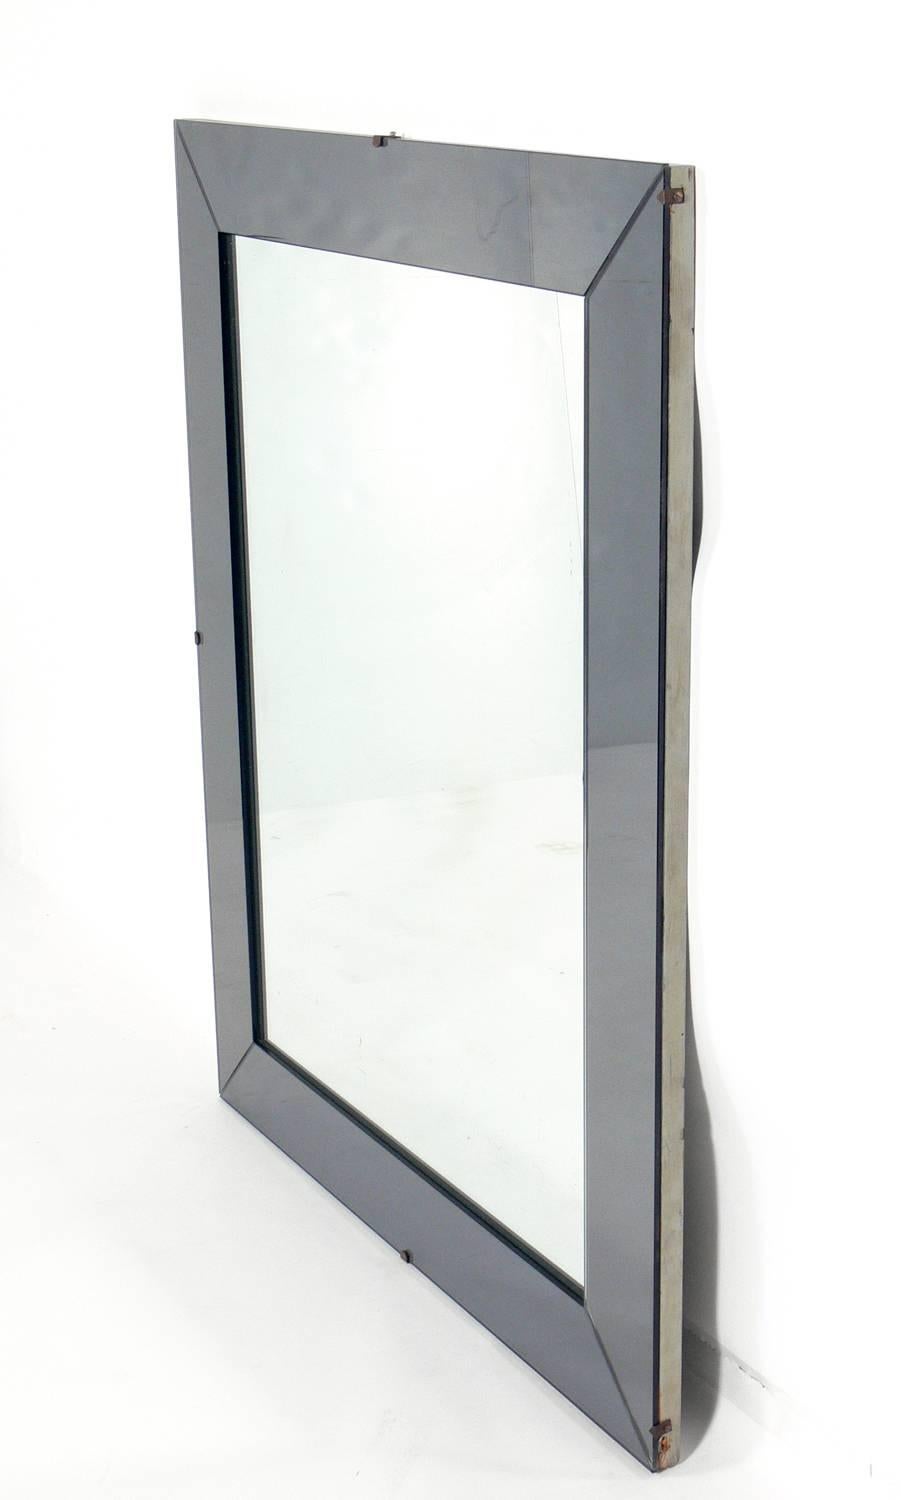 Elegant mirror in gun metal color mirrored glass frame, American, circa 1950s. It can be hung horizontally or vertically. Retains warm original patina to original mirrored glass.